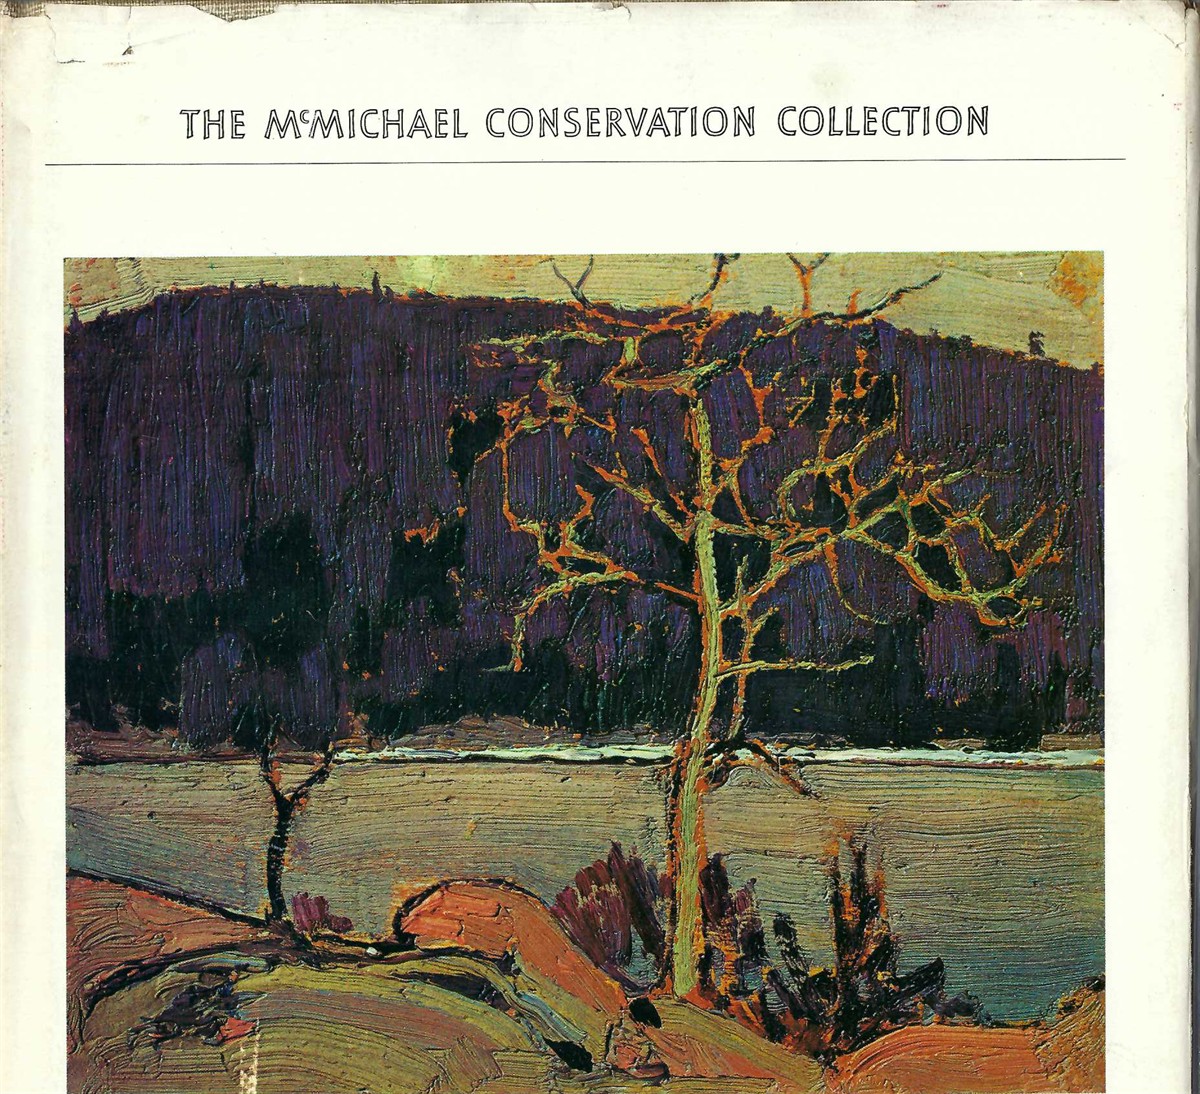 MCMICHAEL CONSERVATION COLLECTION - The Mcmichael Conservation Collection of Art, Kleinberg, Ontario